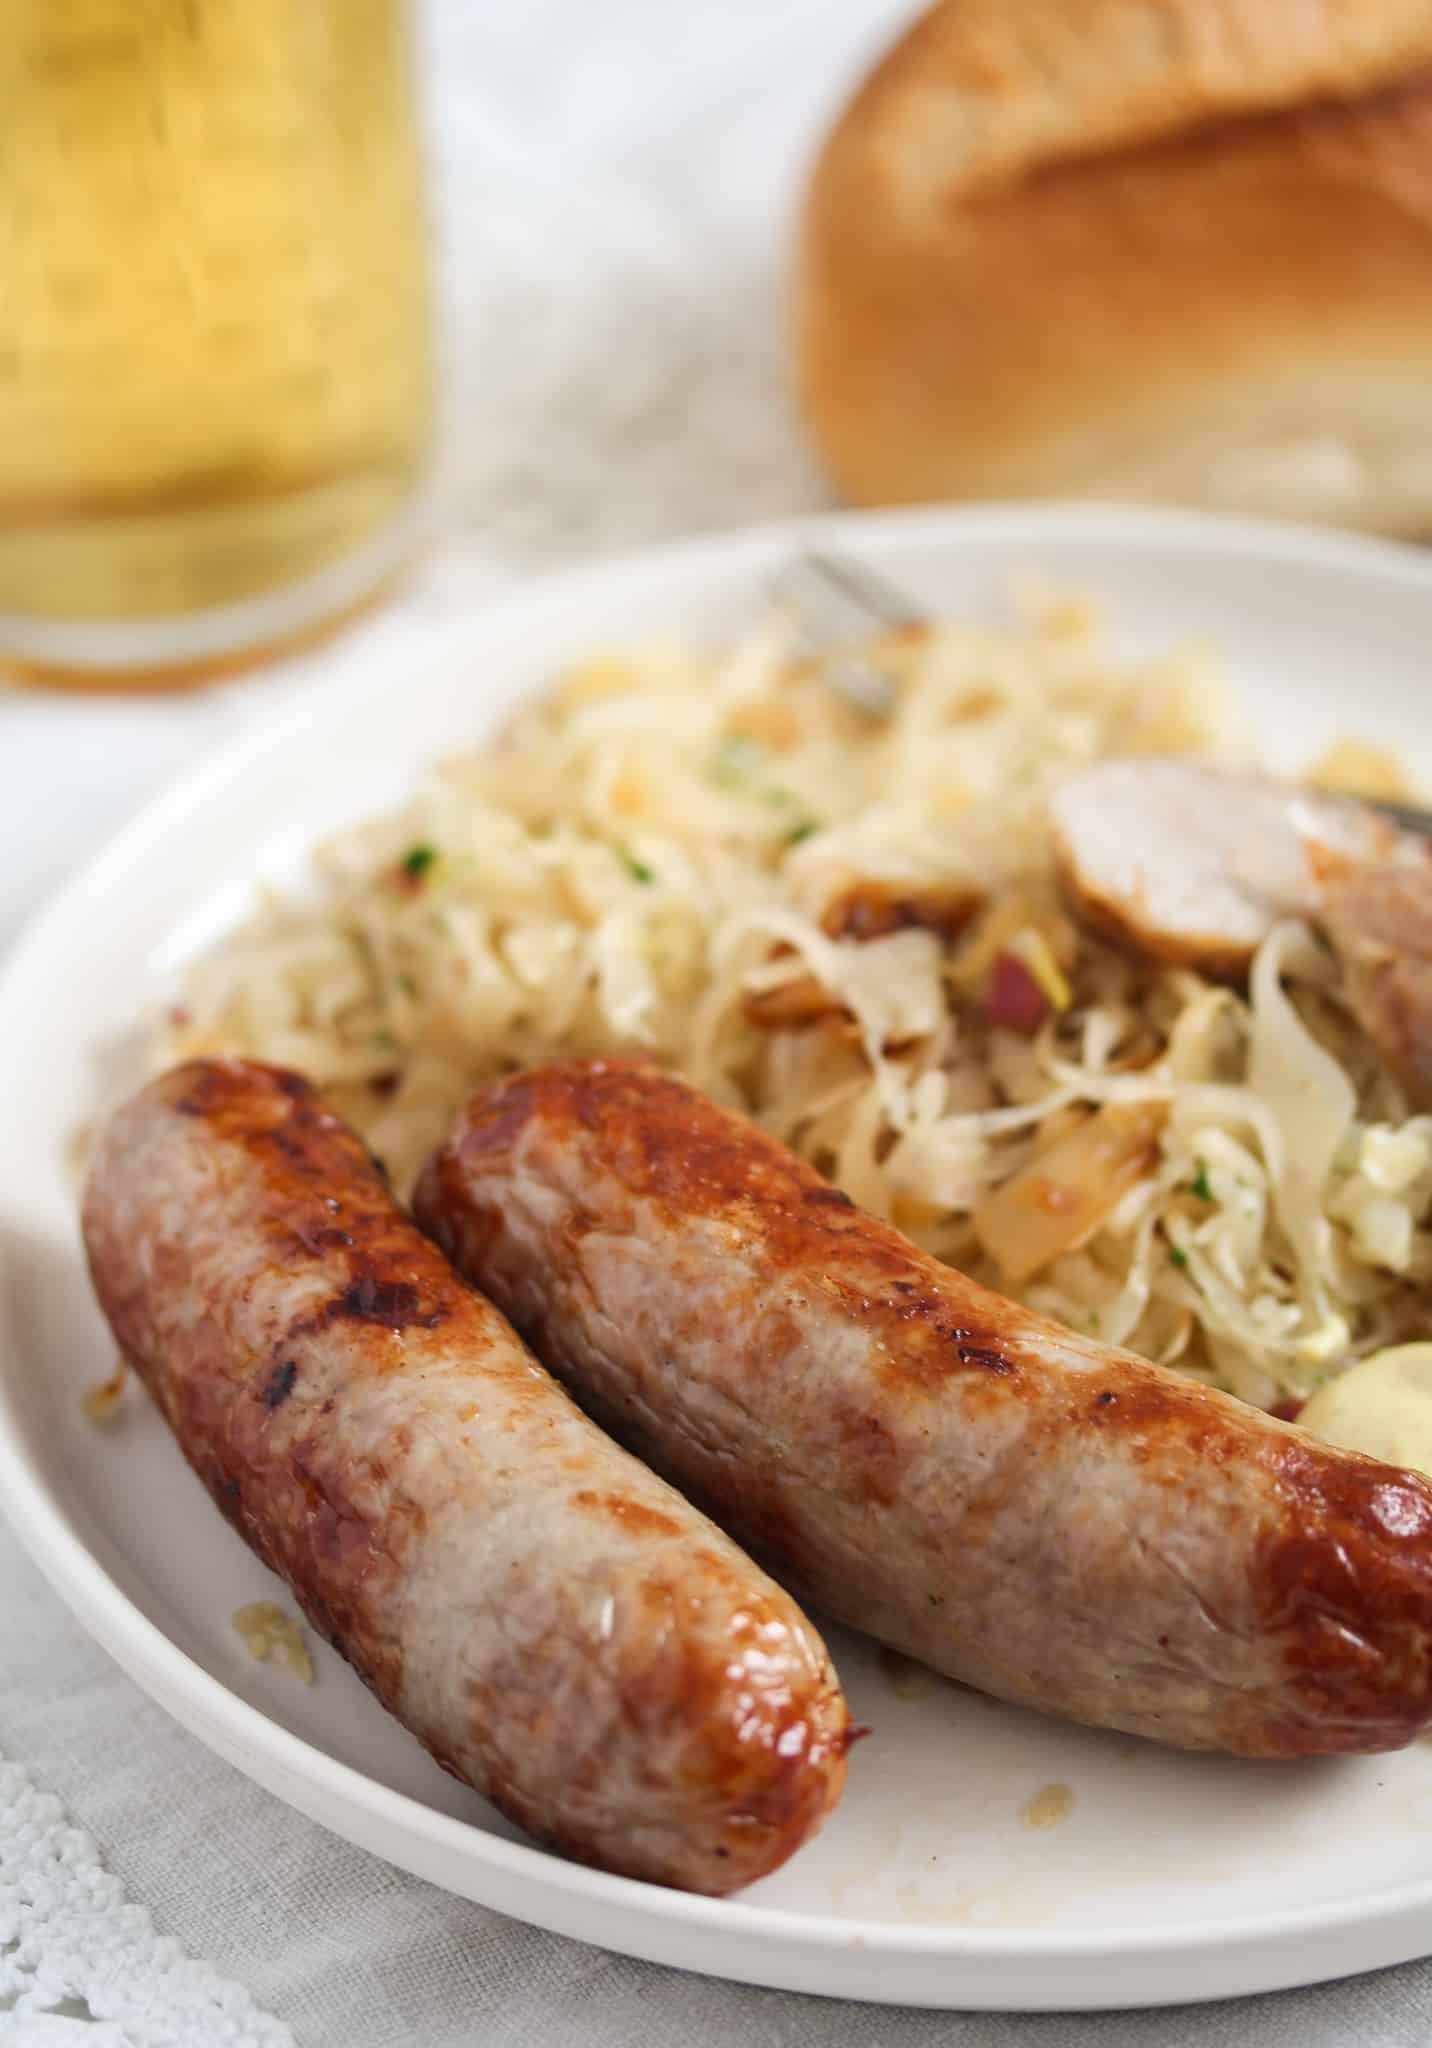 two sausages on a bed of sauerkraut with a bread roll and a glass of beer behind.